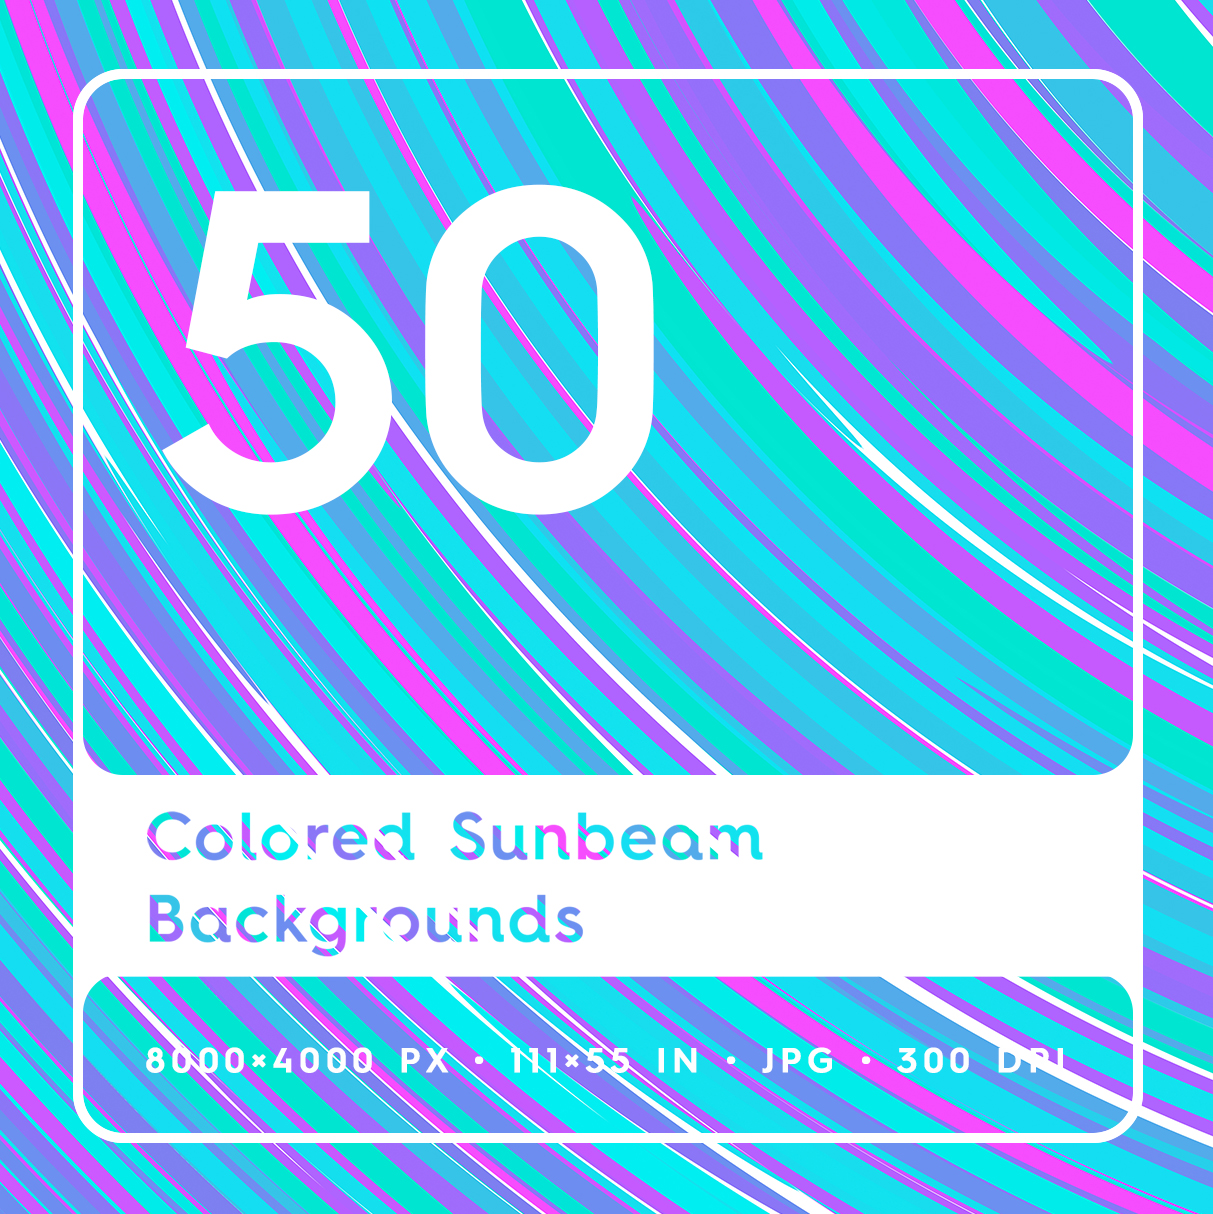 50 Colored Sunbeam Backgrounds Square Cover